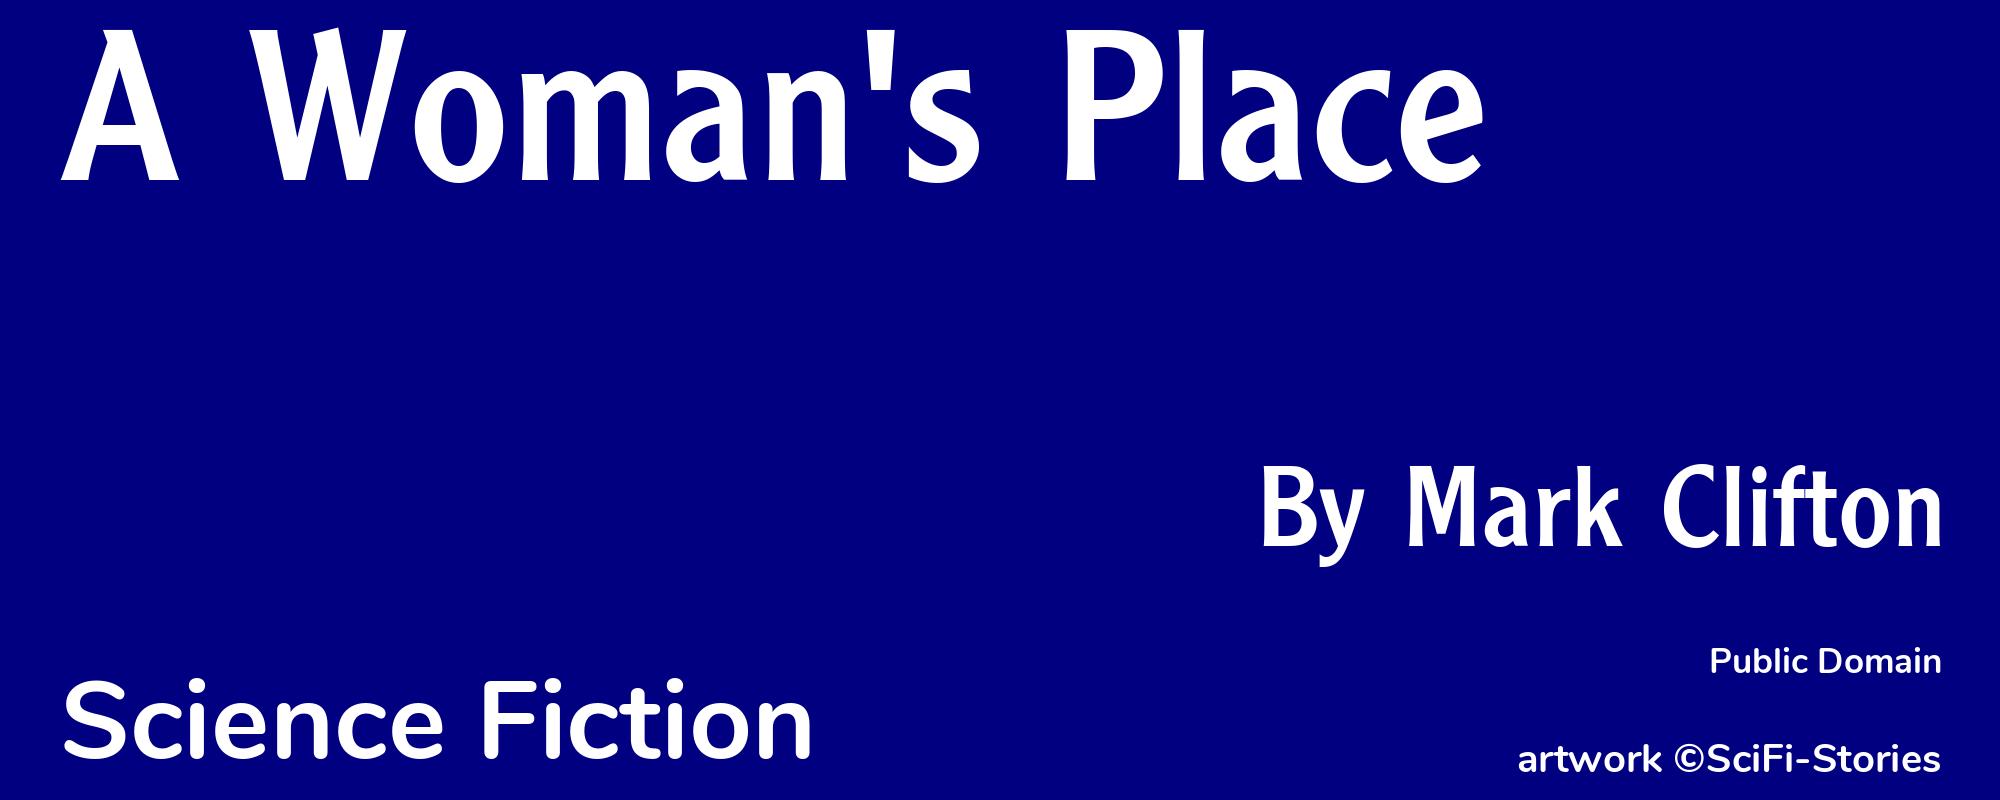 A Woman's Place - Cover